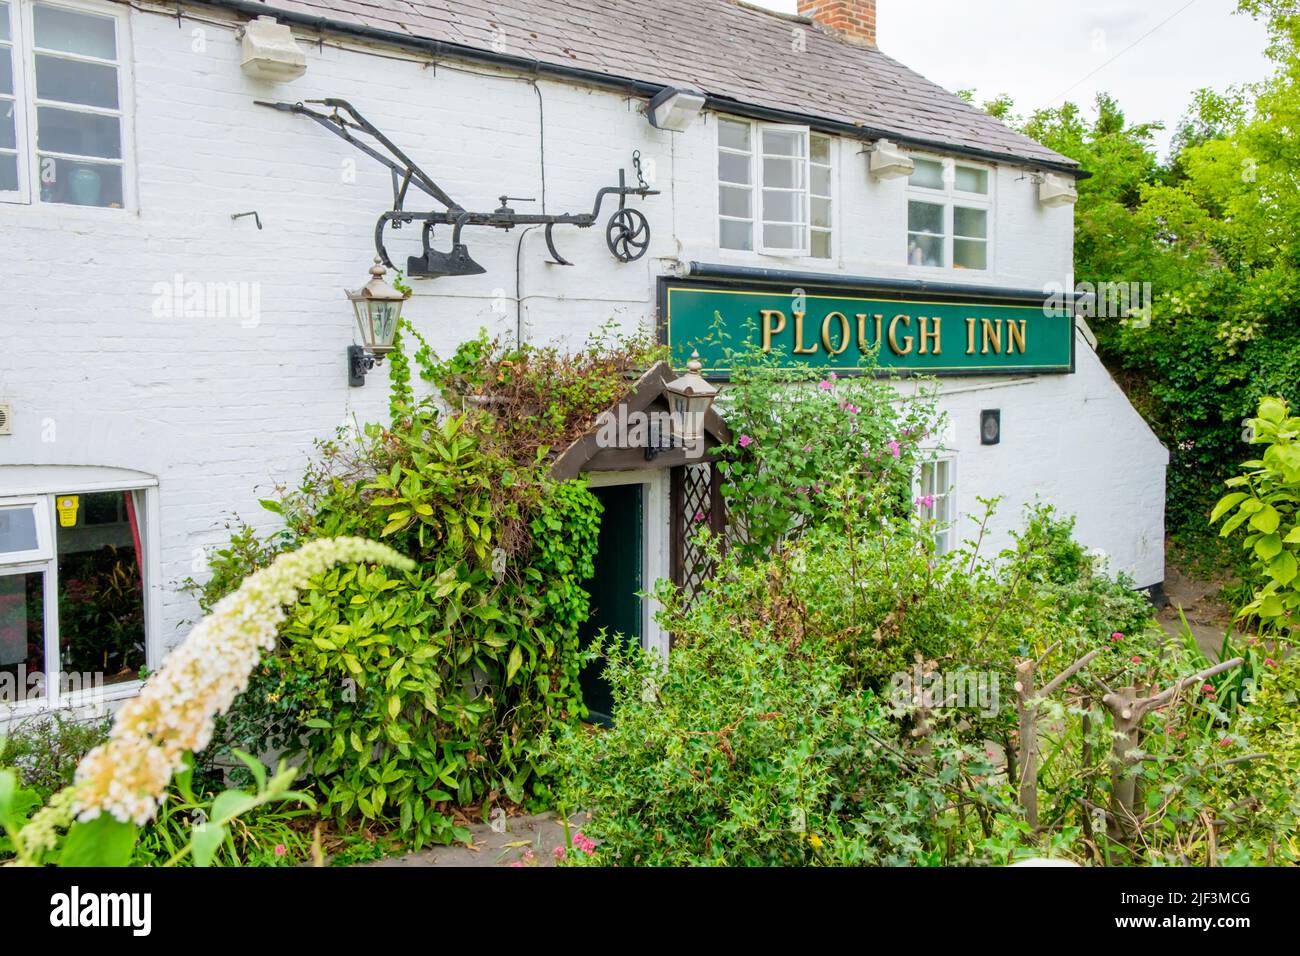 The Plough Inn located near the Grantham canal, Hickling, Nottinghamshire, England UK Stock Photo